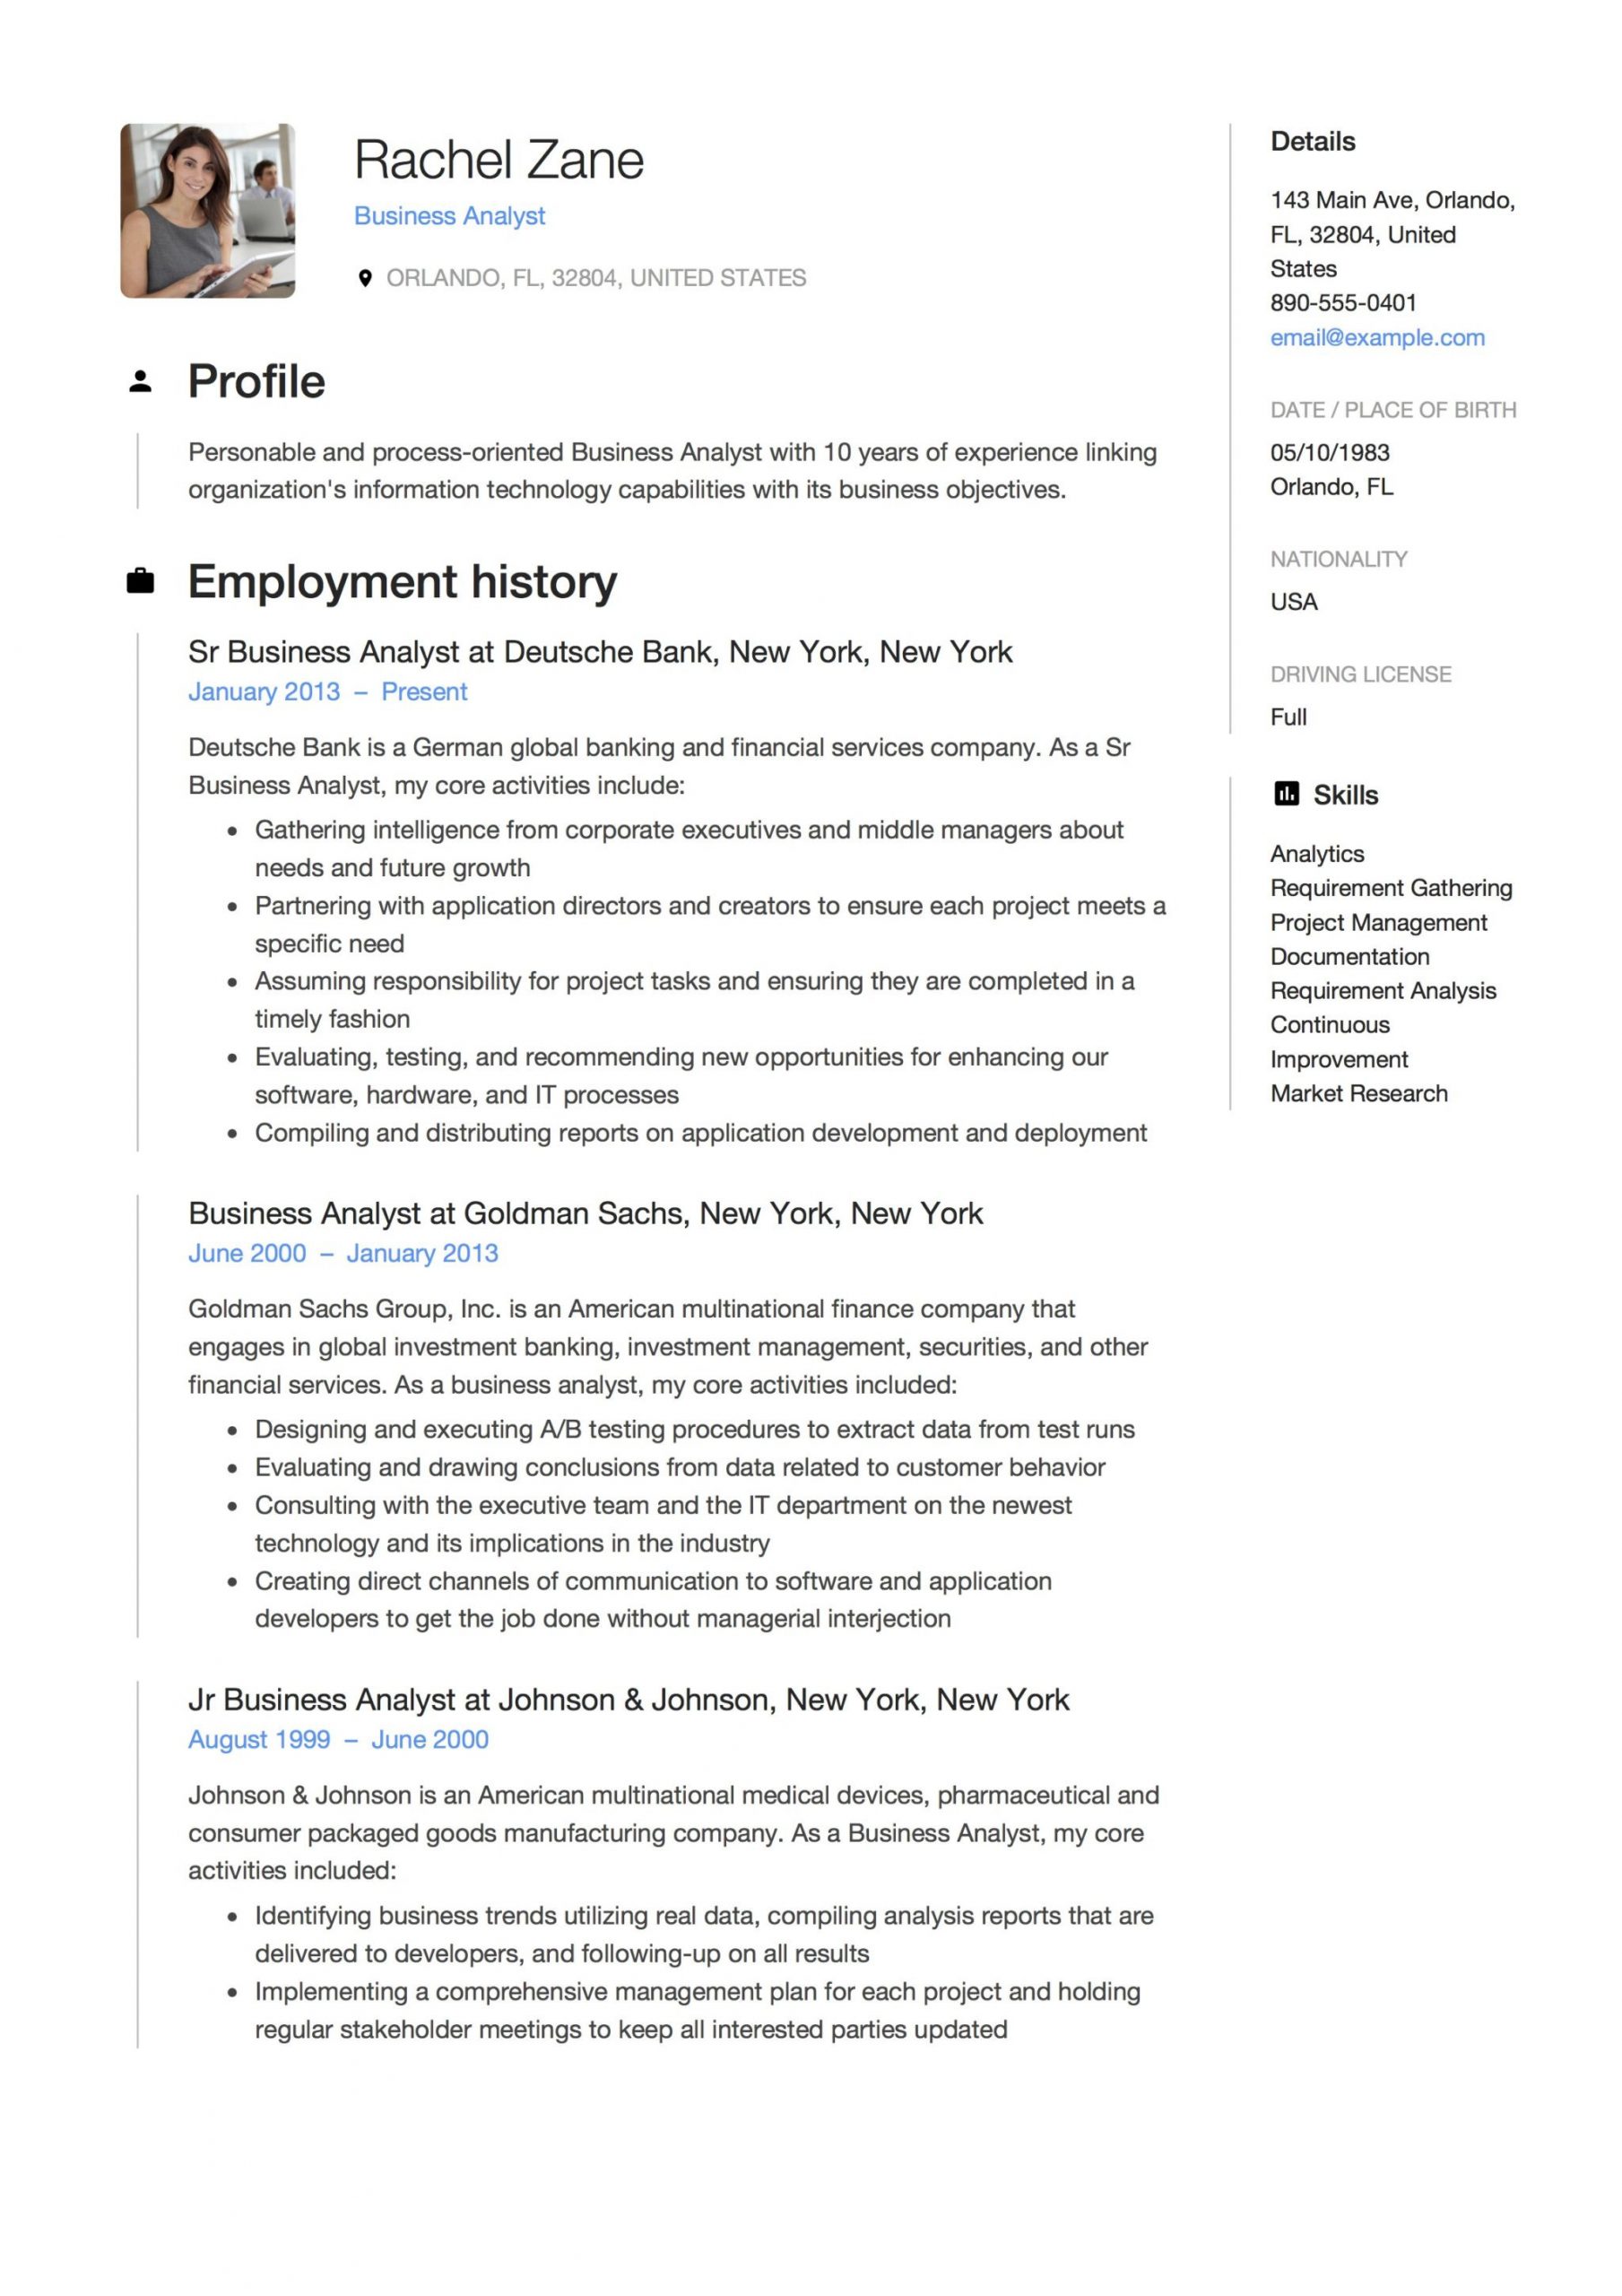 Sample Resume for Business Analyst Position Business Analyst Resume & Guide 12 Templates Pdf